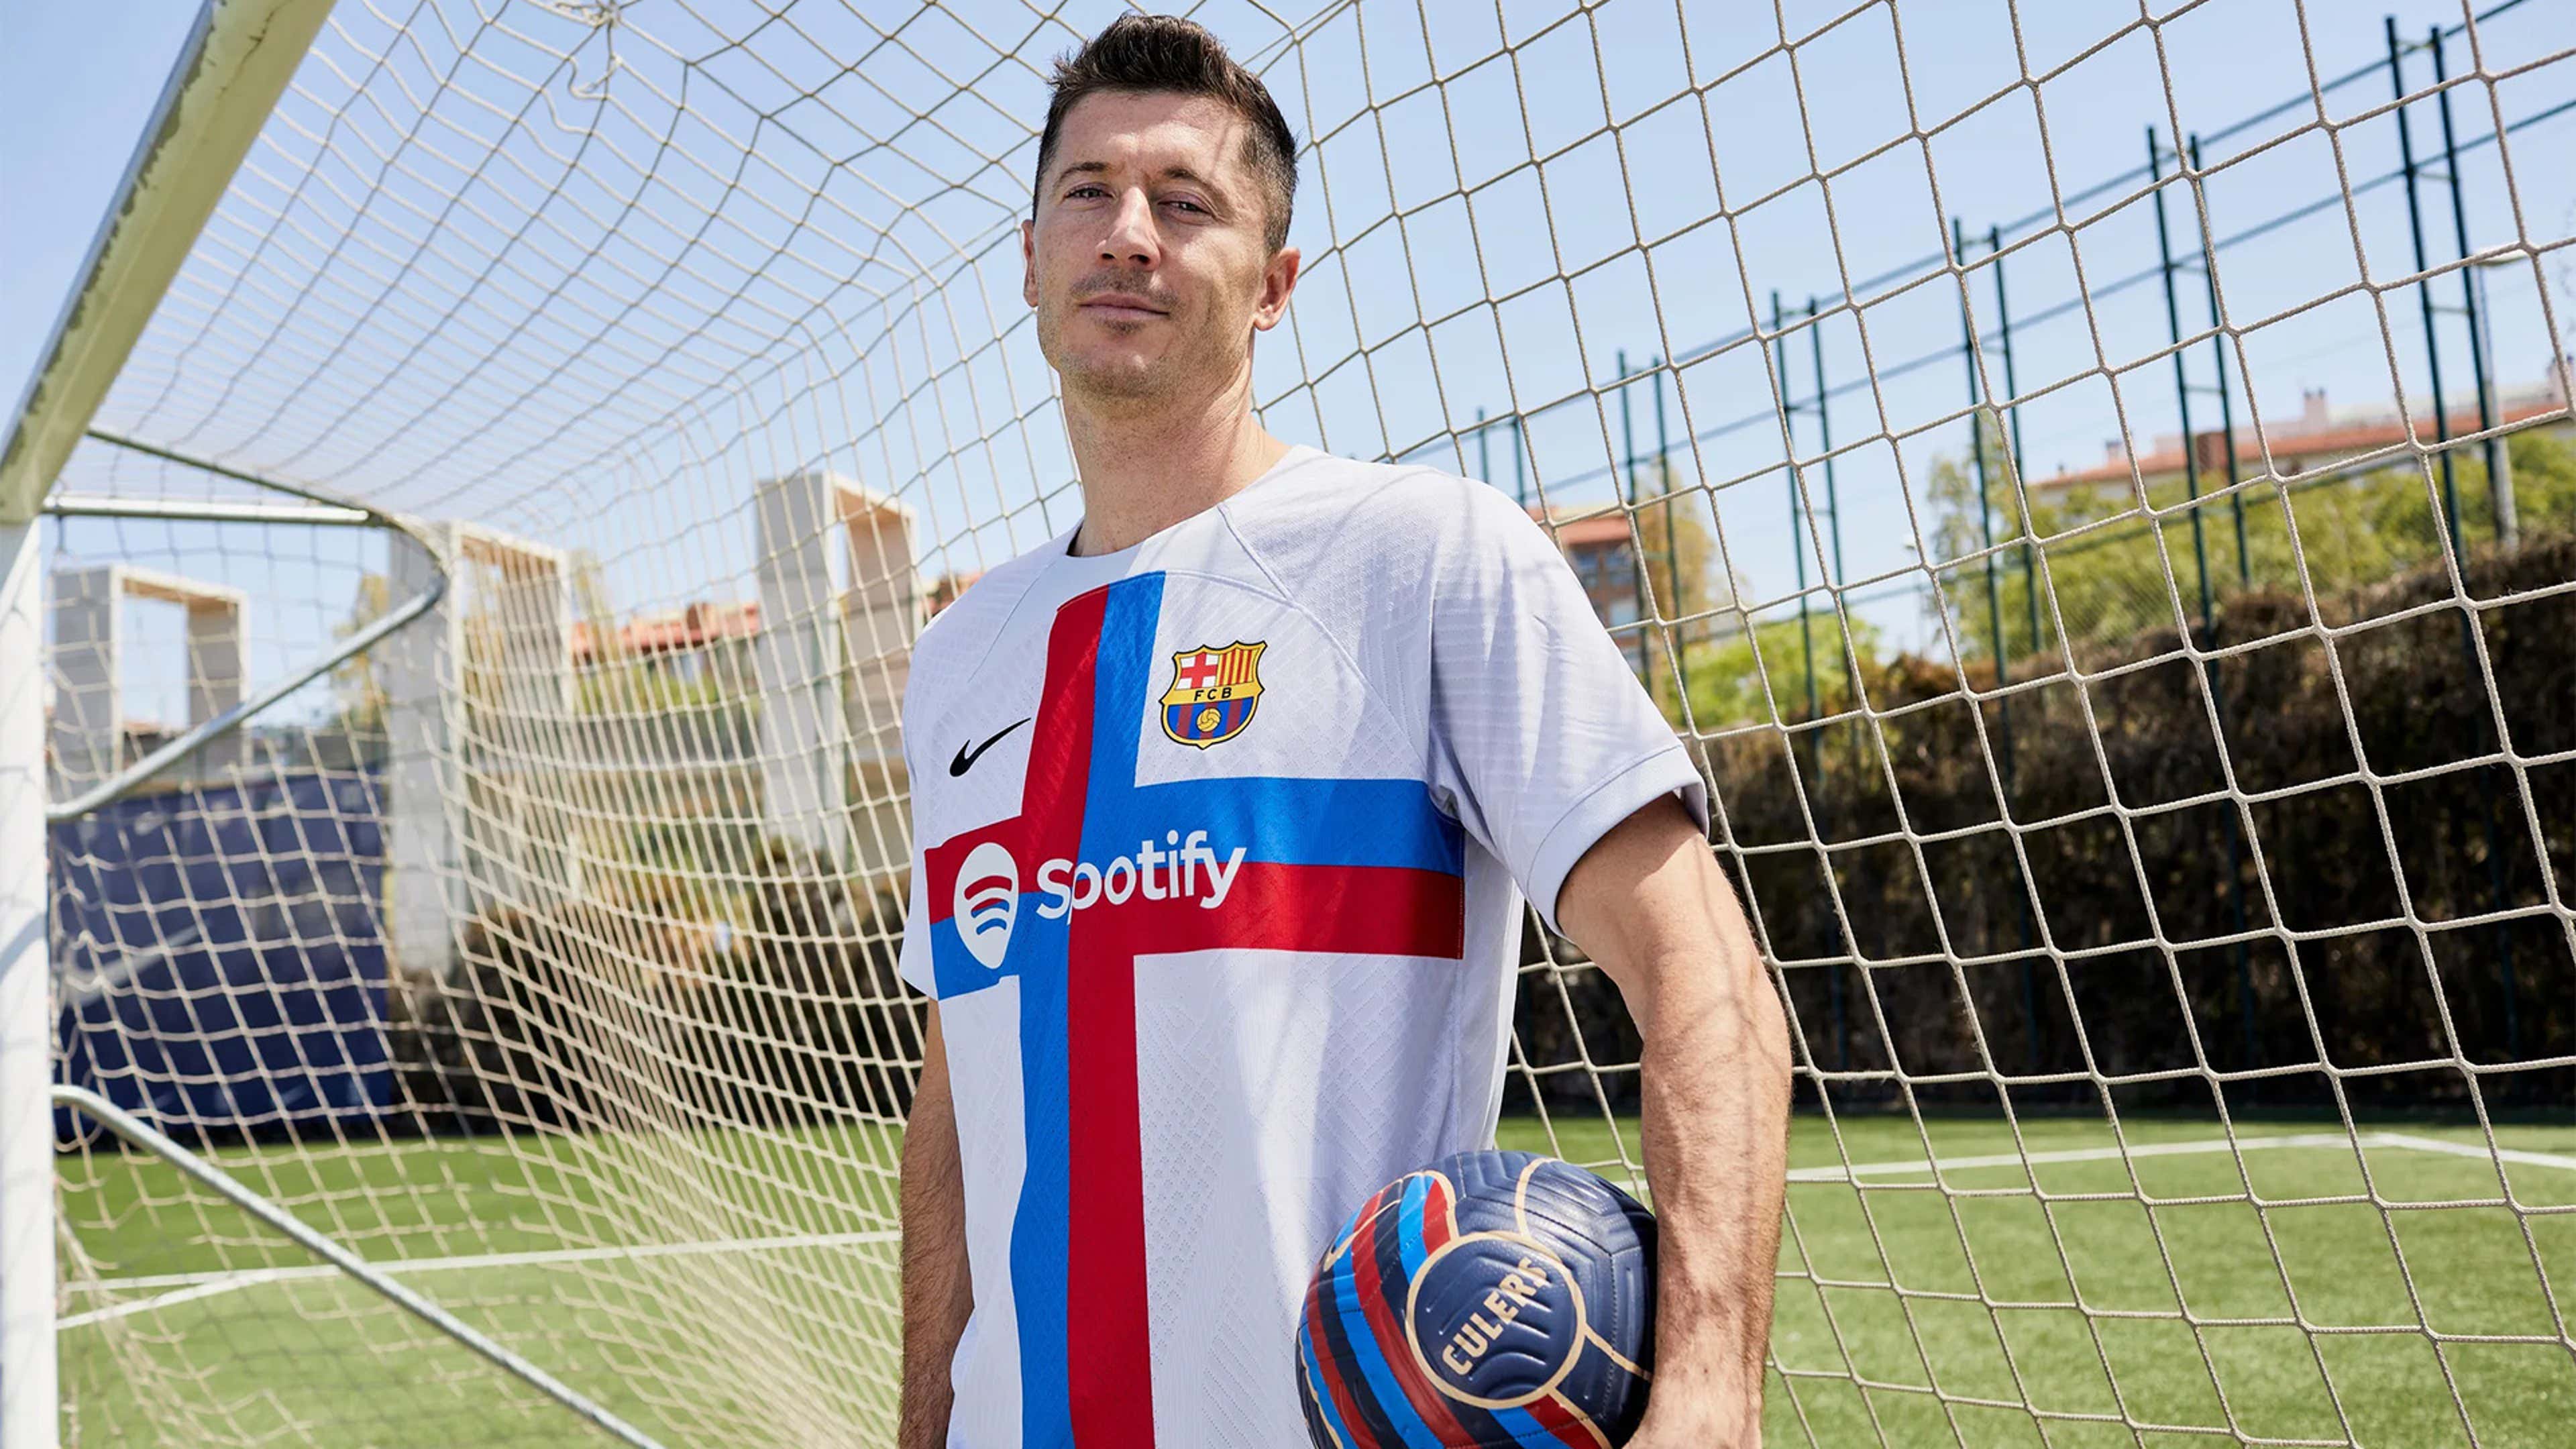 Persoon belast met sportgame raket Veel gevaarlijke situaties Barcelona and Nike unveil new 2022-23 third kit inspired by the club's  commitment to inclusion and diversity | Goal.com English Bahrain